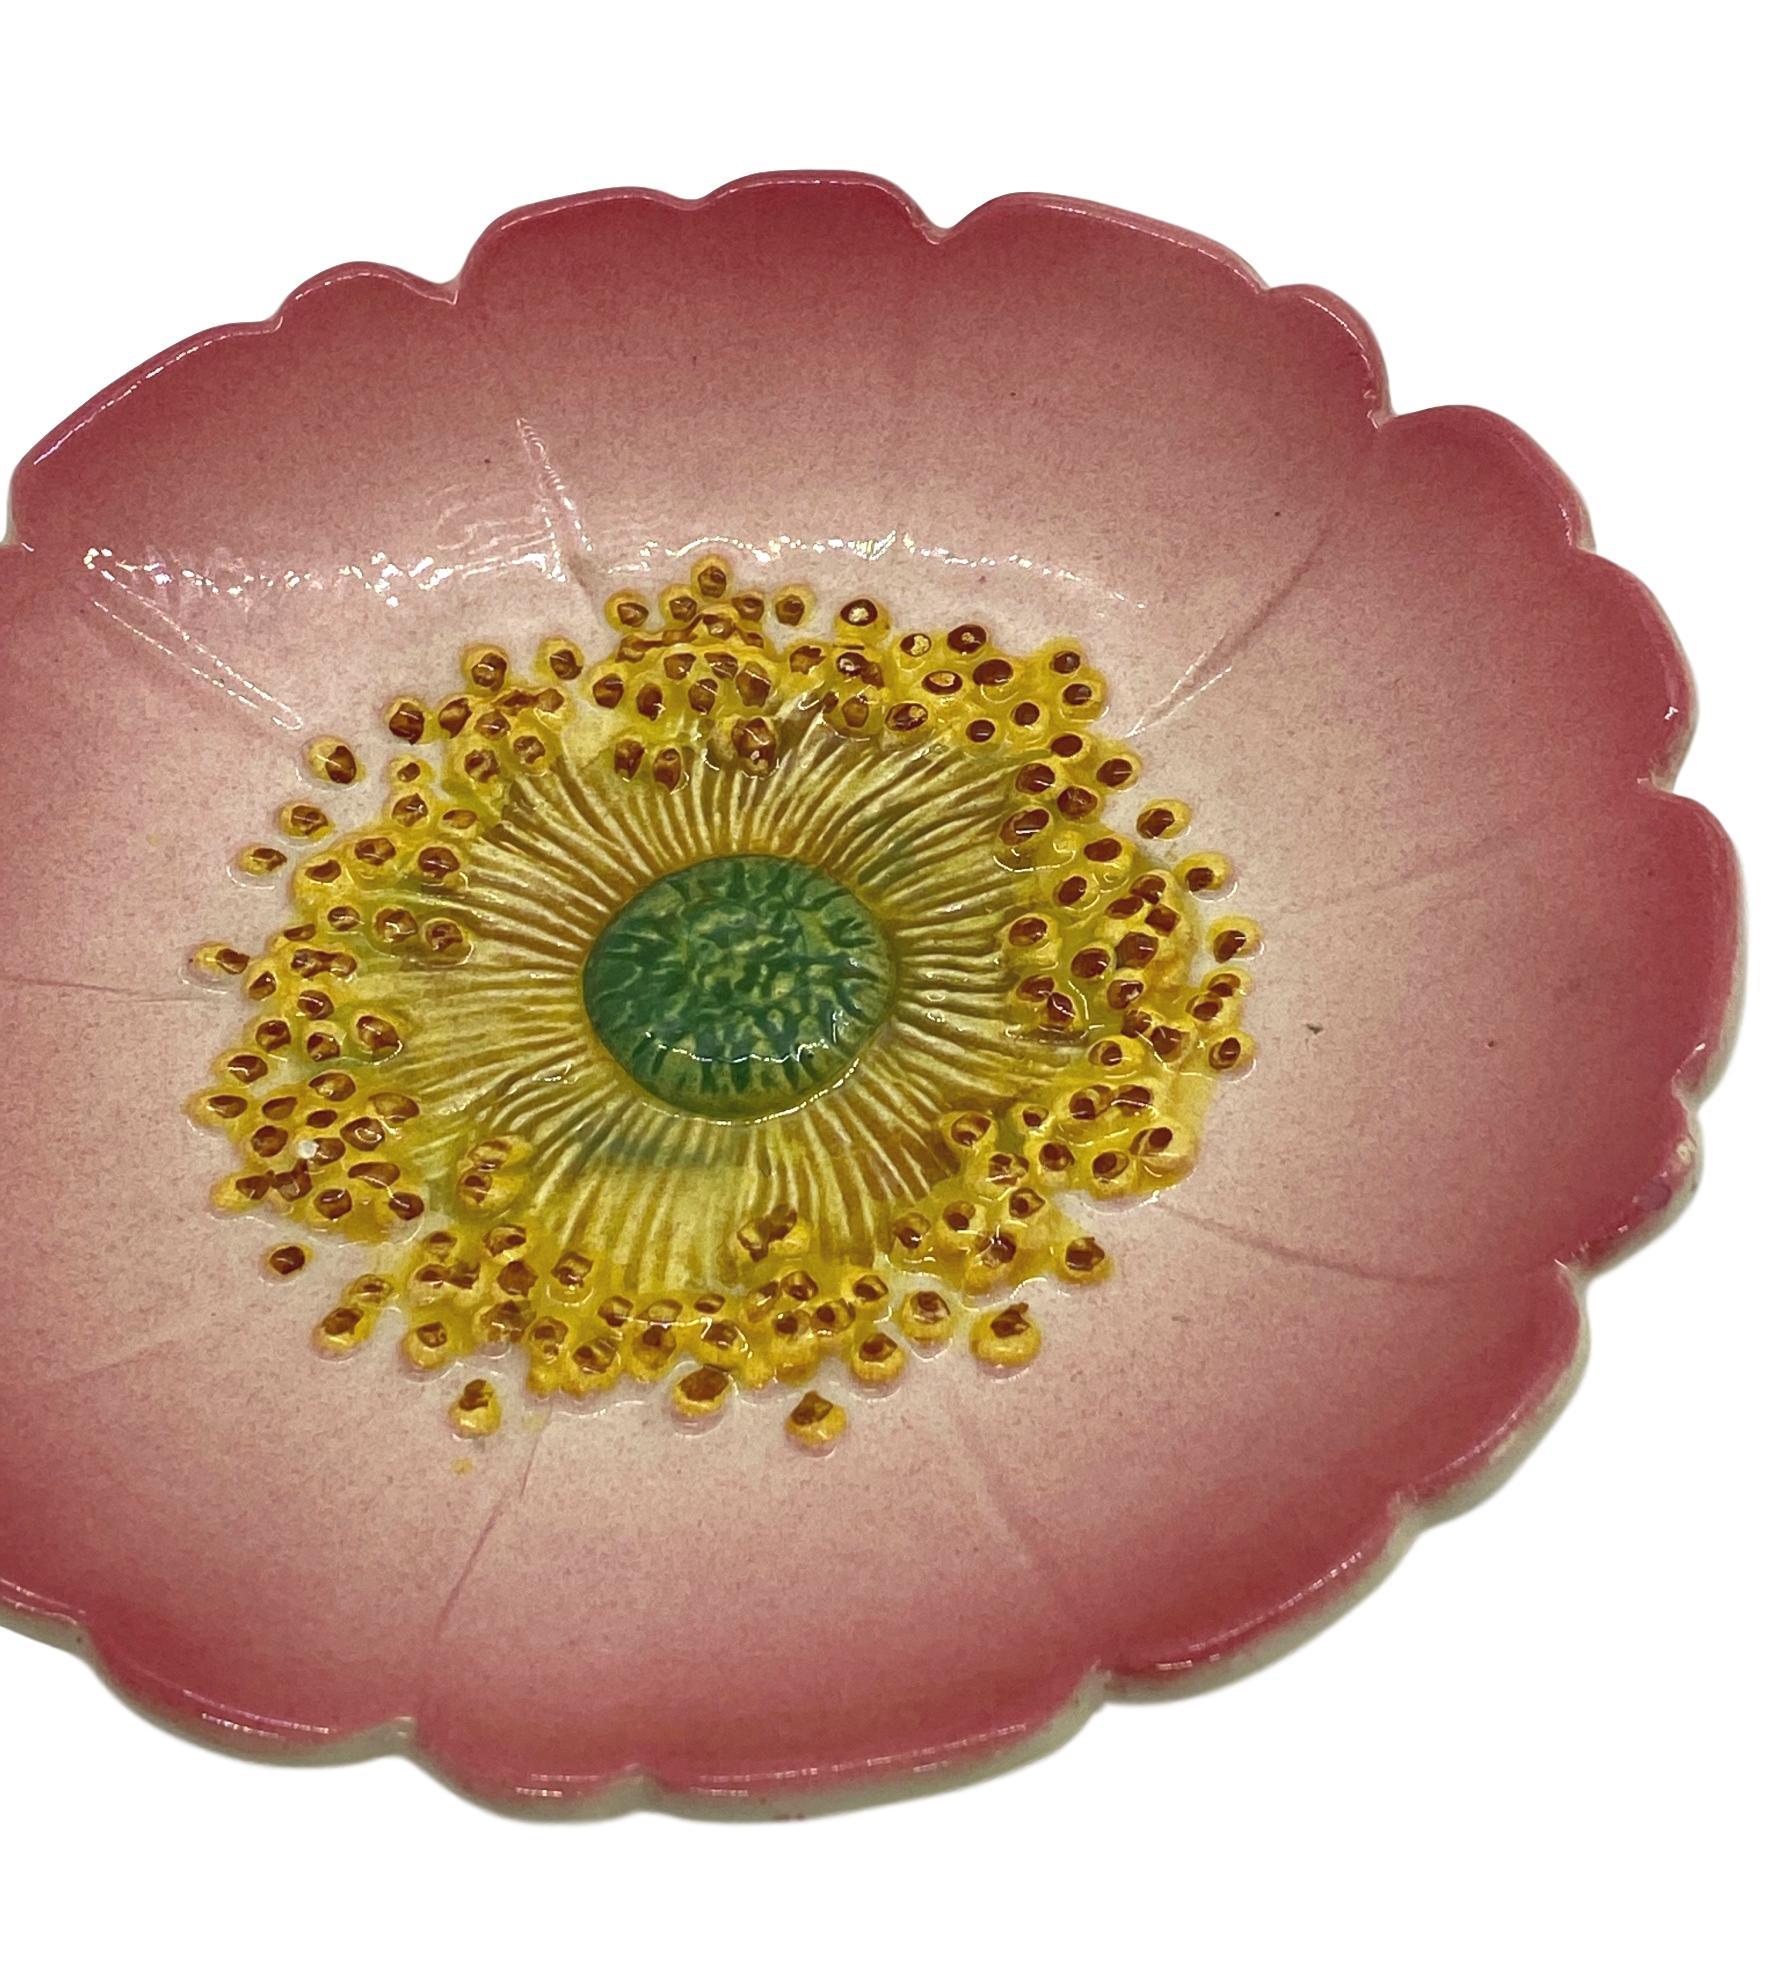 Delphin Massier Majolica (Barbotine) Trompe L'oeil pink flower plate, French, circa 1895, naturalistically molded as a rosehip flower, signed on reverse: 'Delphin Massier'
Measurements: Diameter 7.75 x Height 1.25.
For over 28 years we have been